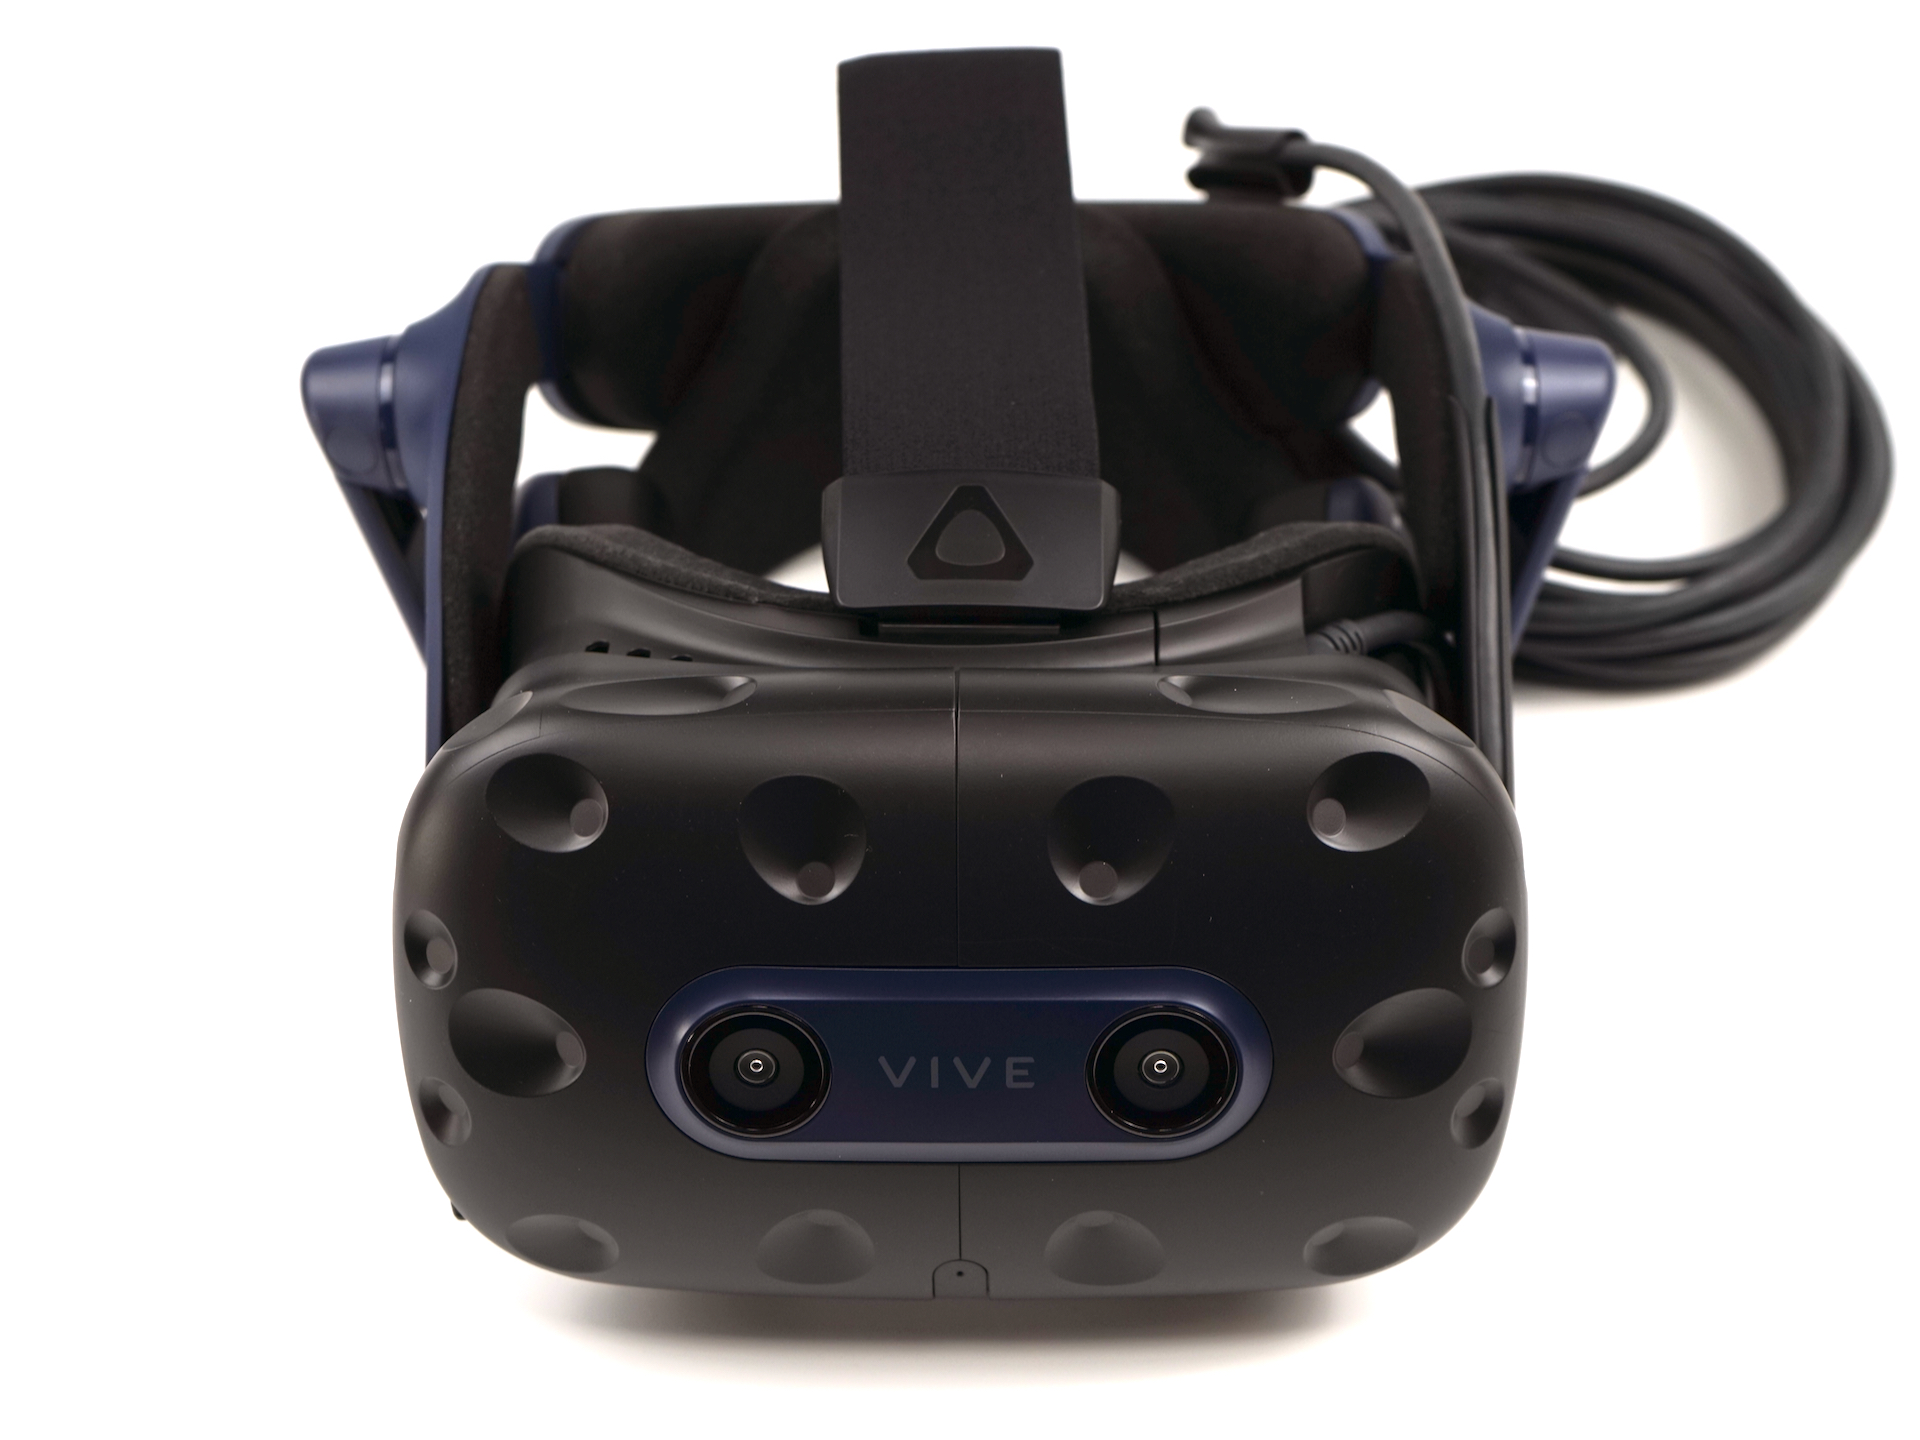 HTC Vive 2 - for Enthusiasts just Business Customers? - NotebookCheck.net Reviews